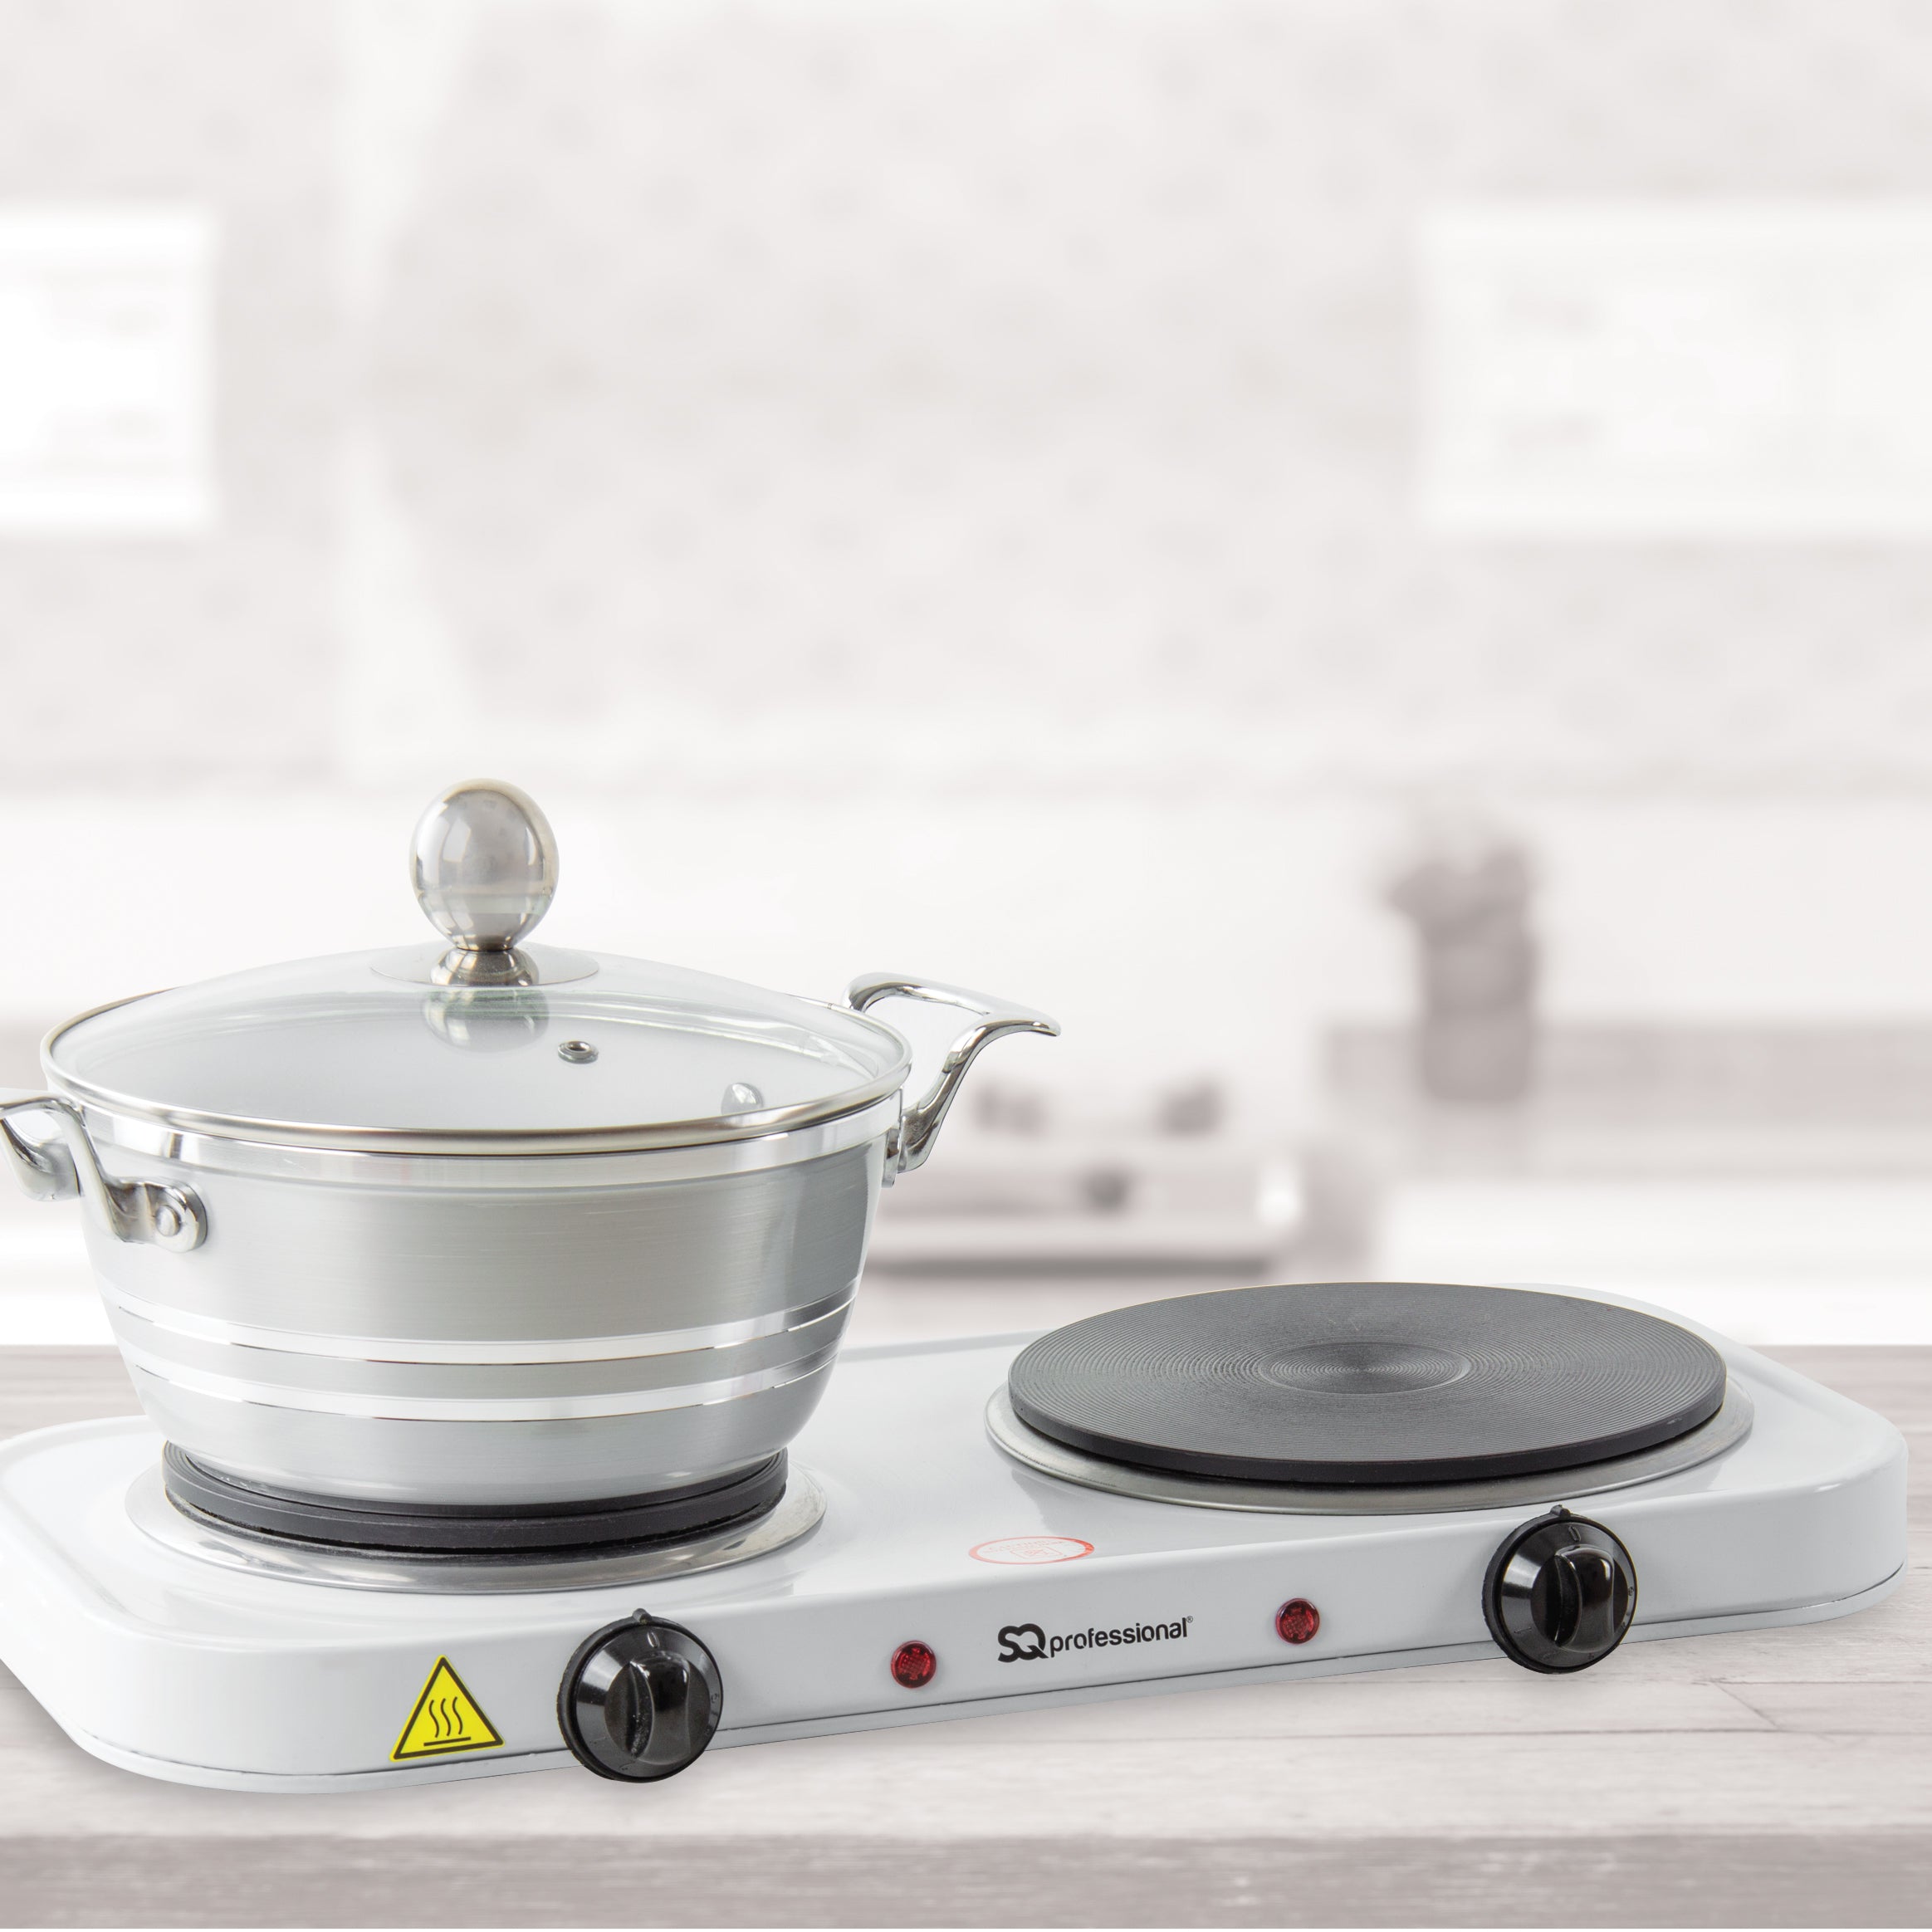 Electric Hot Plate Hob - DOUBLE